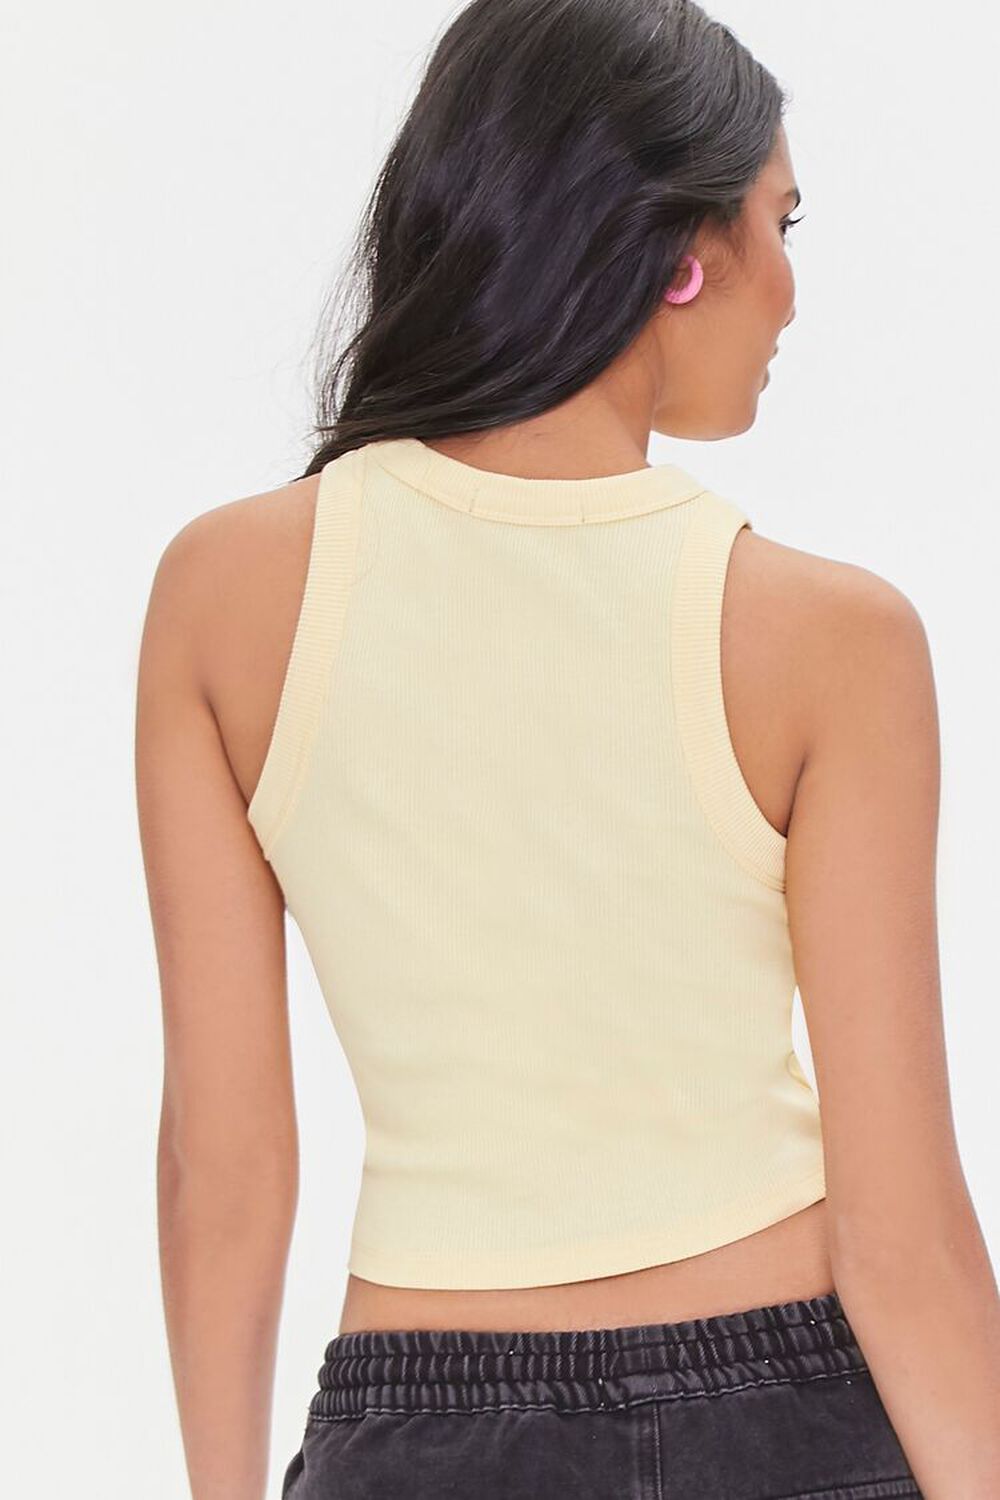 YELLOW/MULTI Good Things Will Come Crop Top, image 3